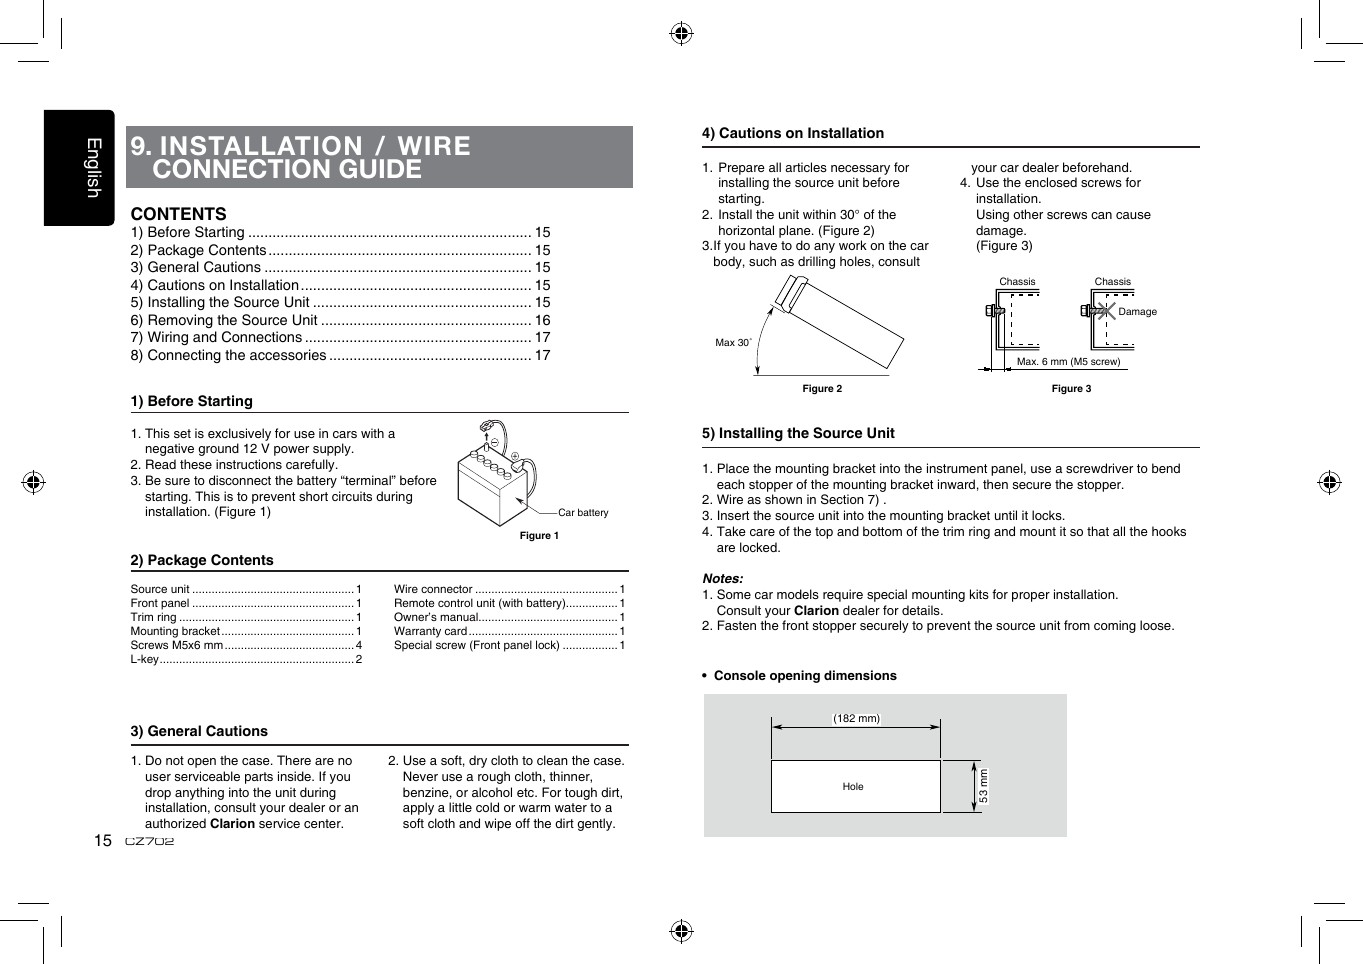 English15CZ7029.  INSTALLATION / WIRE CONNECTION GUIDE1) Before Starting1.  This set is exclusively for use in cars with a negative ground 12 V power supply.2. Read these instructions carefully.3.  Be sure to disconnect the battery “terminal” before starting. This is to prevent short circuits during installation. (Figure 1)2) Package Contents3) General Cautions1.  Do not open the case. There are no user serviceable parts inside. If you drop anything into the unit during    installation, consult your dealer or an authorized Clarion service center.2.  Use a soft, dry cloth to clean the case.  Never use a rough cloth, thinner, benzine, or alcohol etc. For tough dirt,  apply a little cold or warm water to a soft cloth and wipe off the dirt gently.CONTENTS1) Before Starting ...................................................................... 152) Package Contents ................................................................. 153) General Cautions .................................................................. 154) Cautions on Installation ......................................................... 155) Installing the Source Unit ...................................................... 156) Removing the Source Unit .................................................... 167) Wiring and Connections ........................................................ 178) Connecting the accessories .................................................. 17Car batteryFigure 1Source unit .................................................. 1Front panel .................................................. 1Trim ring ...................................................... 1Mounting bracket ......................................... 1Screws M5x6 mm ........................................ 4L-key ............................................................ 2Wire connector ............................................ 1Remote control unit (with battery)................ 1Owner’s manual........................................... 1Warranty card .............................................. 1Special screw (Front panel lock) ................. 14) Cautions on Installation1.  Prepare all articles necessary for installing the source unit before starting.2. Install the unit within 30° of the  horizontal plane. (Figure 2)3.  If you have to do any work on the car body, such as drilling holes, consult your car dealer beforehand.4.  Use the enclosed screws for installation.    Using other screws can cause damage.   (Figure 3)5) Installing the Source Unit1.  Place the mounting bracket into the instrument panel, use a screwdriver to bend each stopper of the mounting bracket inward, then secure the stopper.2. Wire as shown in Section 7) .3. Insert the source unit into the mounting bracket until it locks.4.  Take care of the top and bottom of the trim ring and mount it so that all the hooks are locked.Notes:1. Some car models require special mounting kits for proper installation.   Consult your Clarion dealer for details.2. Fasten the front stopper securely to prevent the source unit from coming loose.•  Console opening dimensions(182 mm)53 mmHoleMax 30˚Chassis ChassisDamageMax. 6 mm (M5 screw)Figure 2 Figure 3